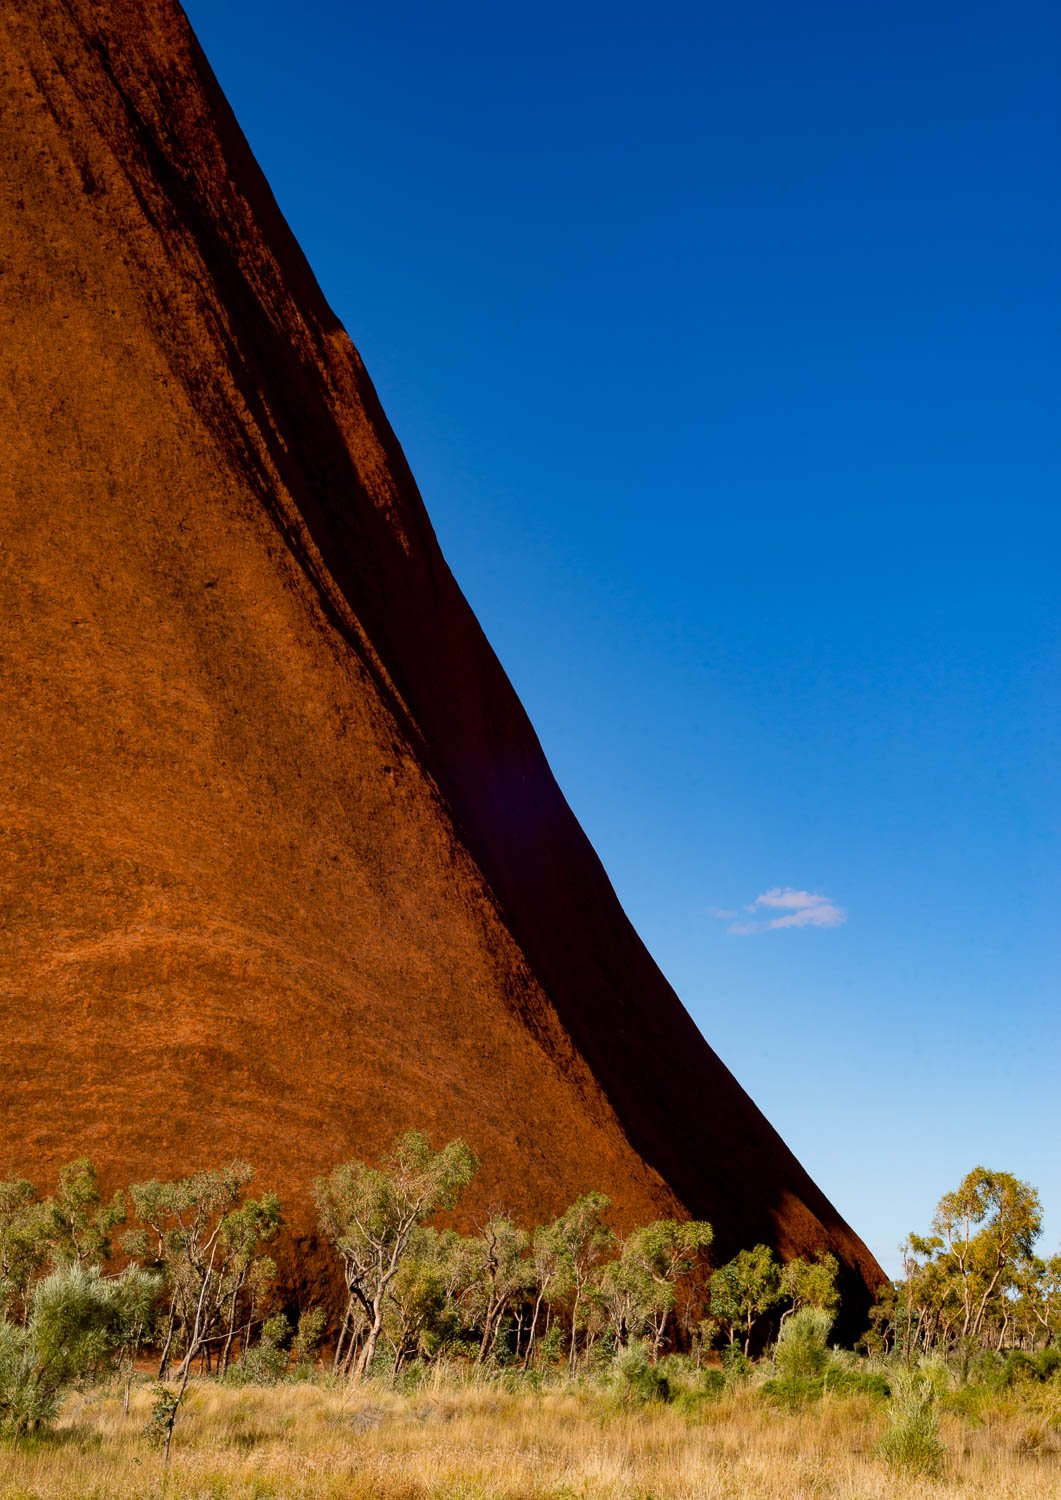 A pyramid-like high mountain wall with some plants on the base, Uluru Curves - Northern Territory